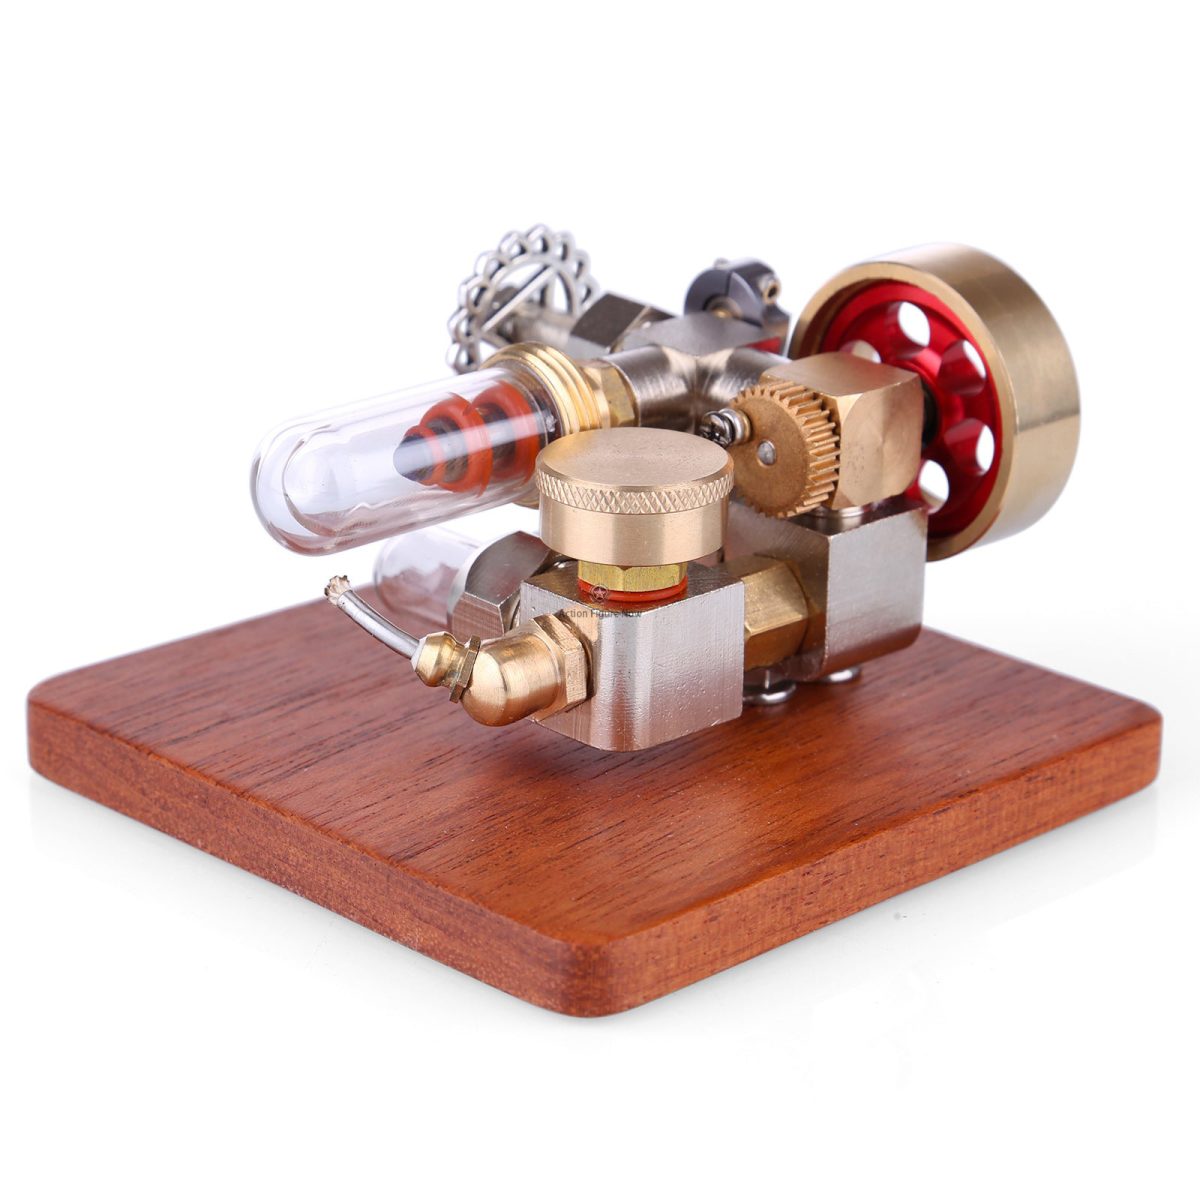 Adjustable Mini Stirling Engine Model with Wooden Base: Educational Toy and Science Experiment